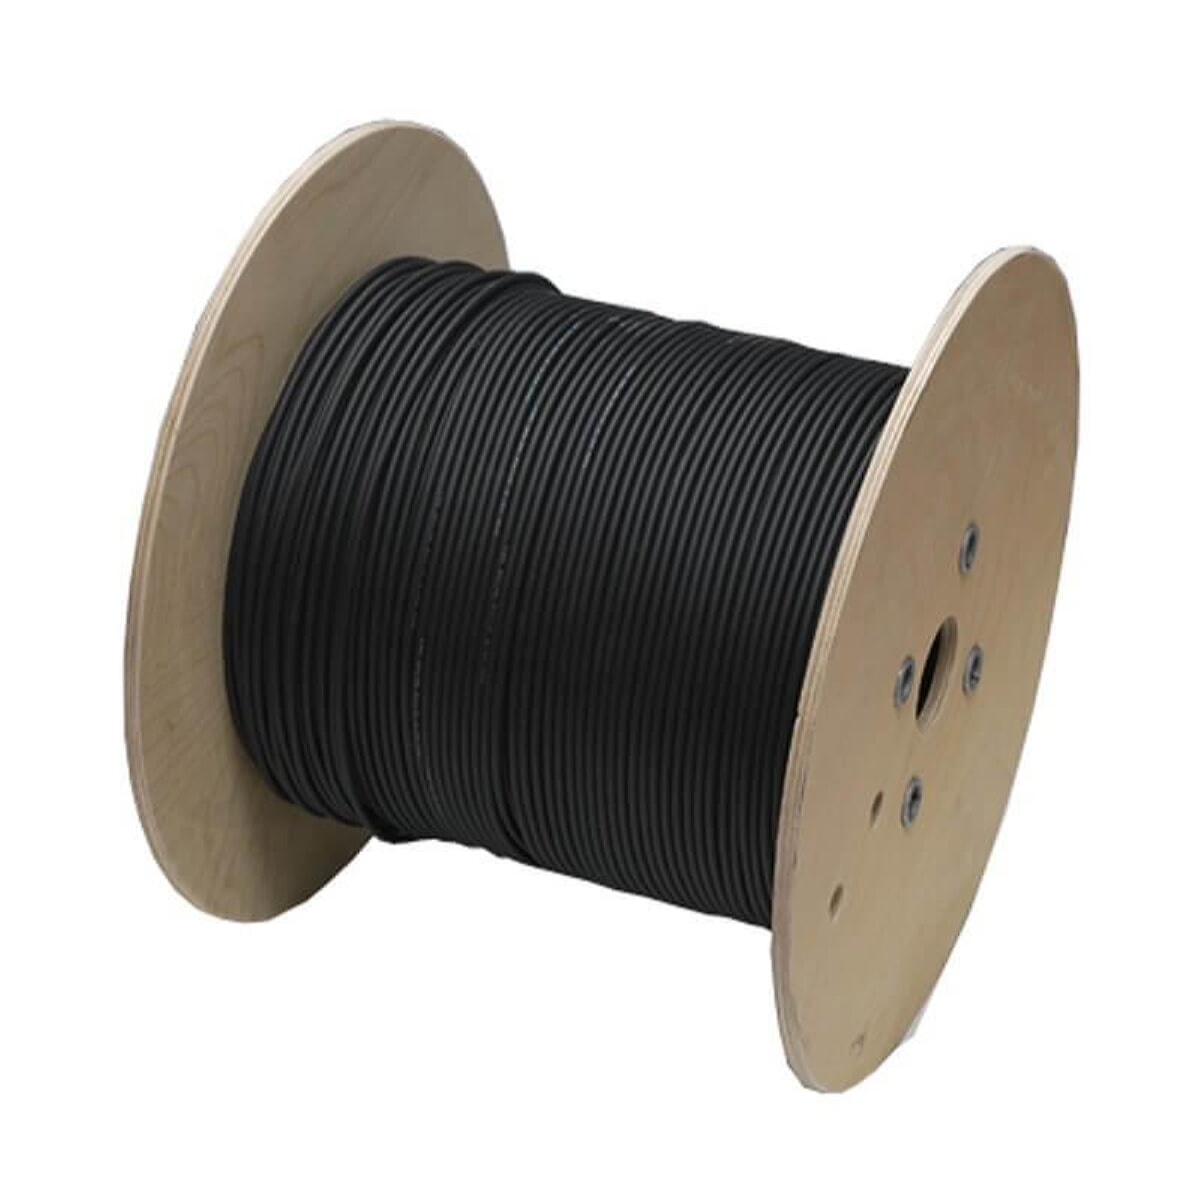 KBE solar cable can be buried underground 6mm² DB EN50618 black 500m roll